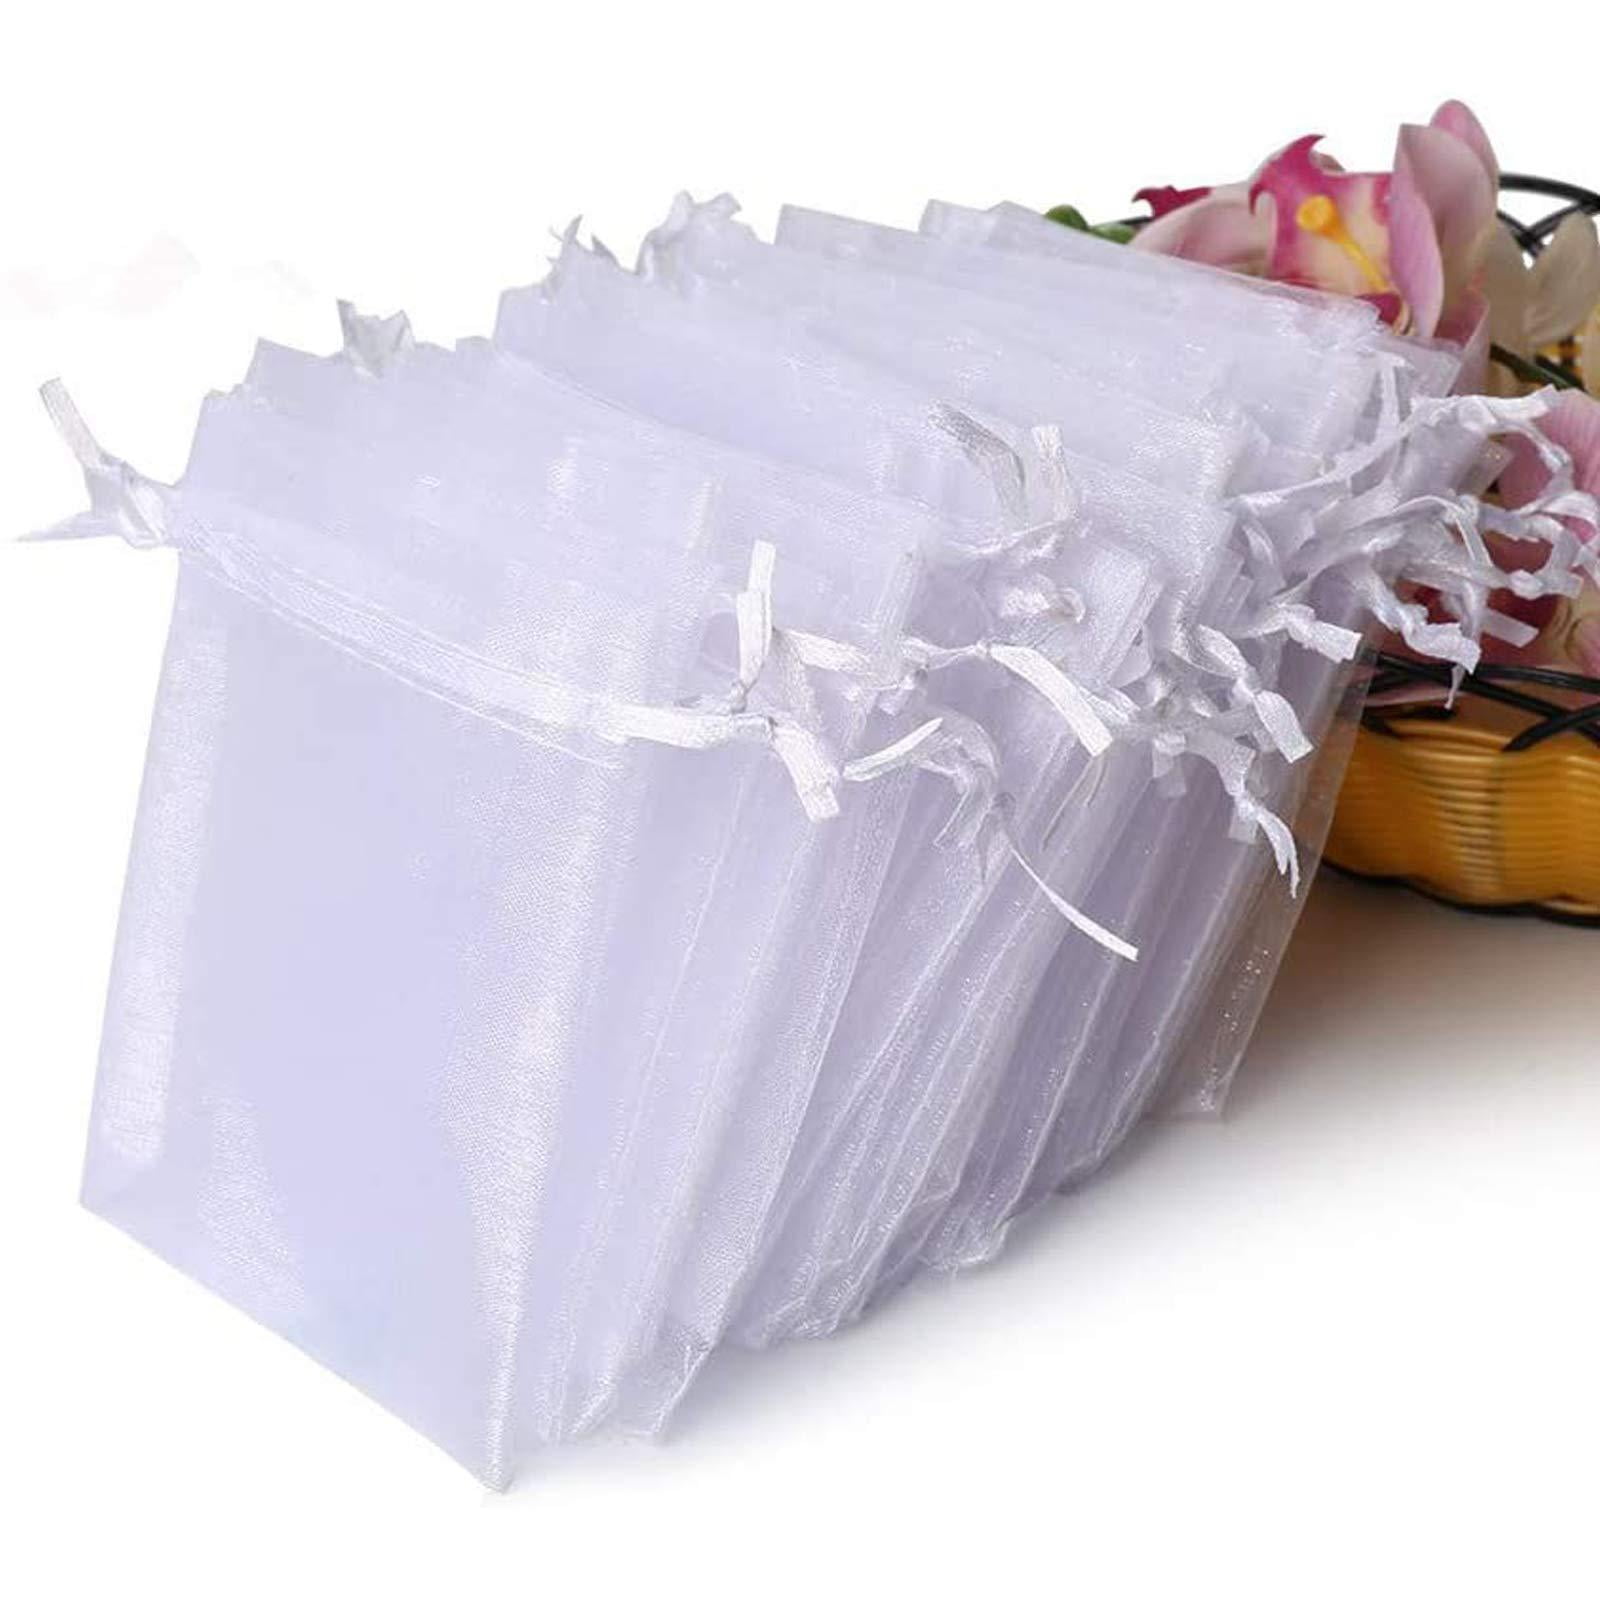 Wholesale 100PCS Drawstring Organza Voile Jewelry Favour Wedding Gift Pouch Bags 